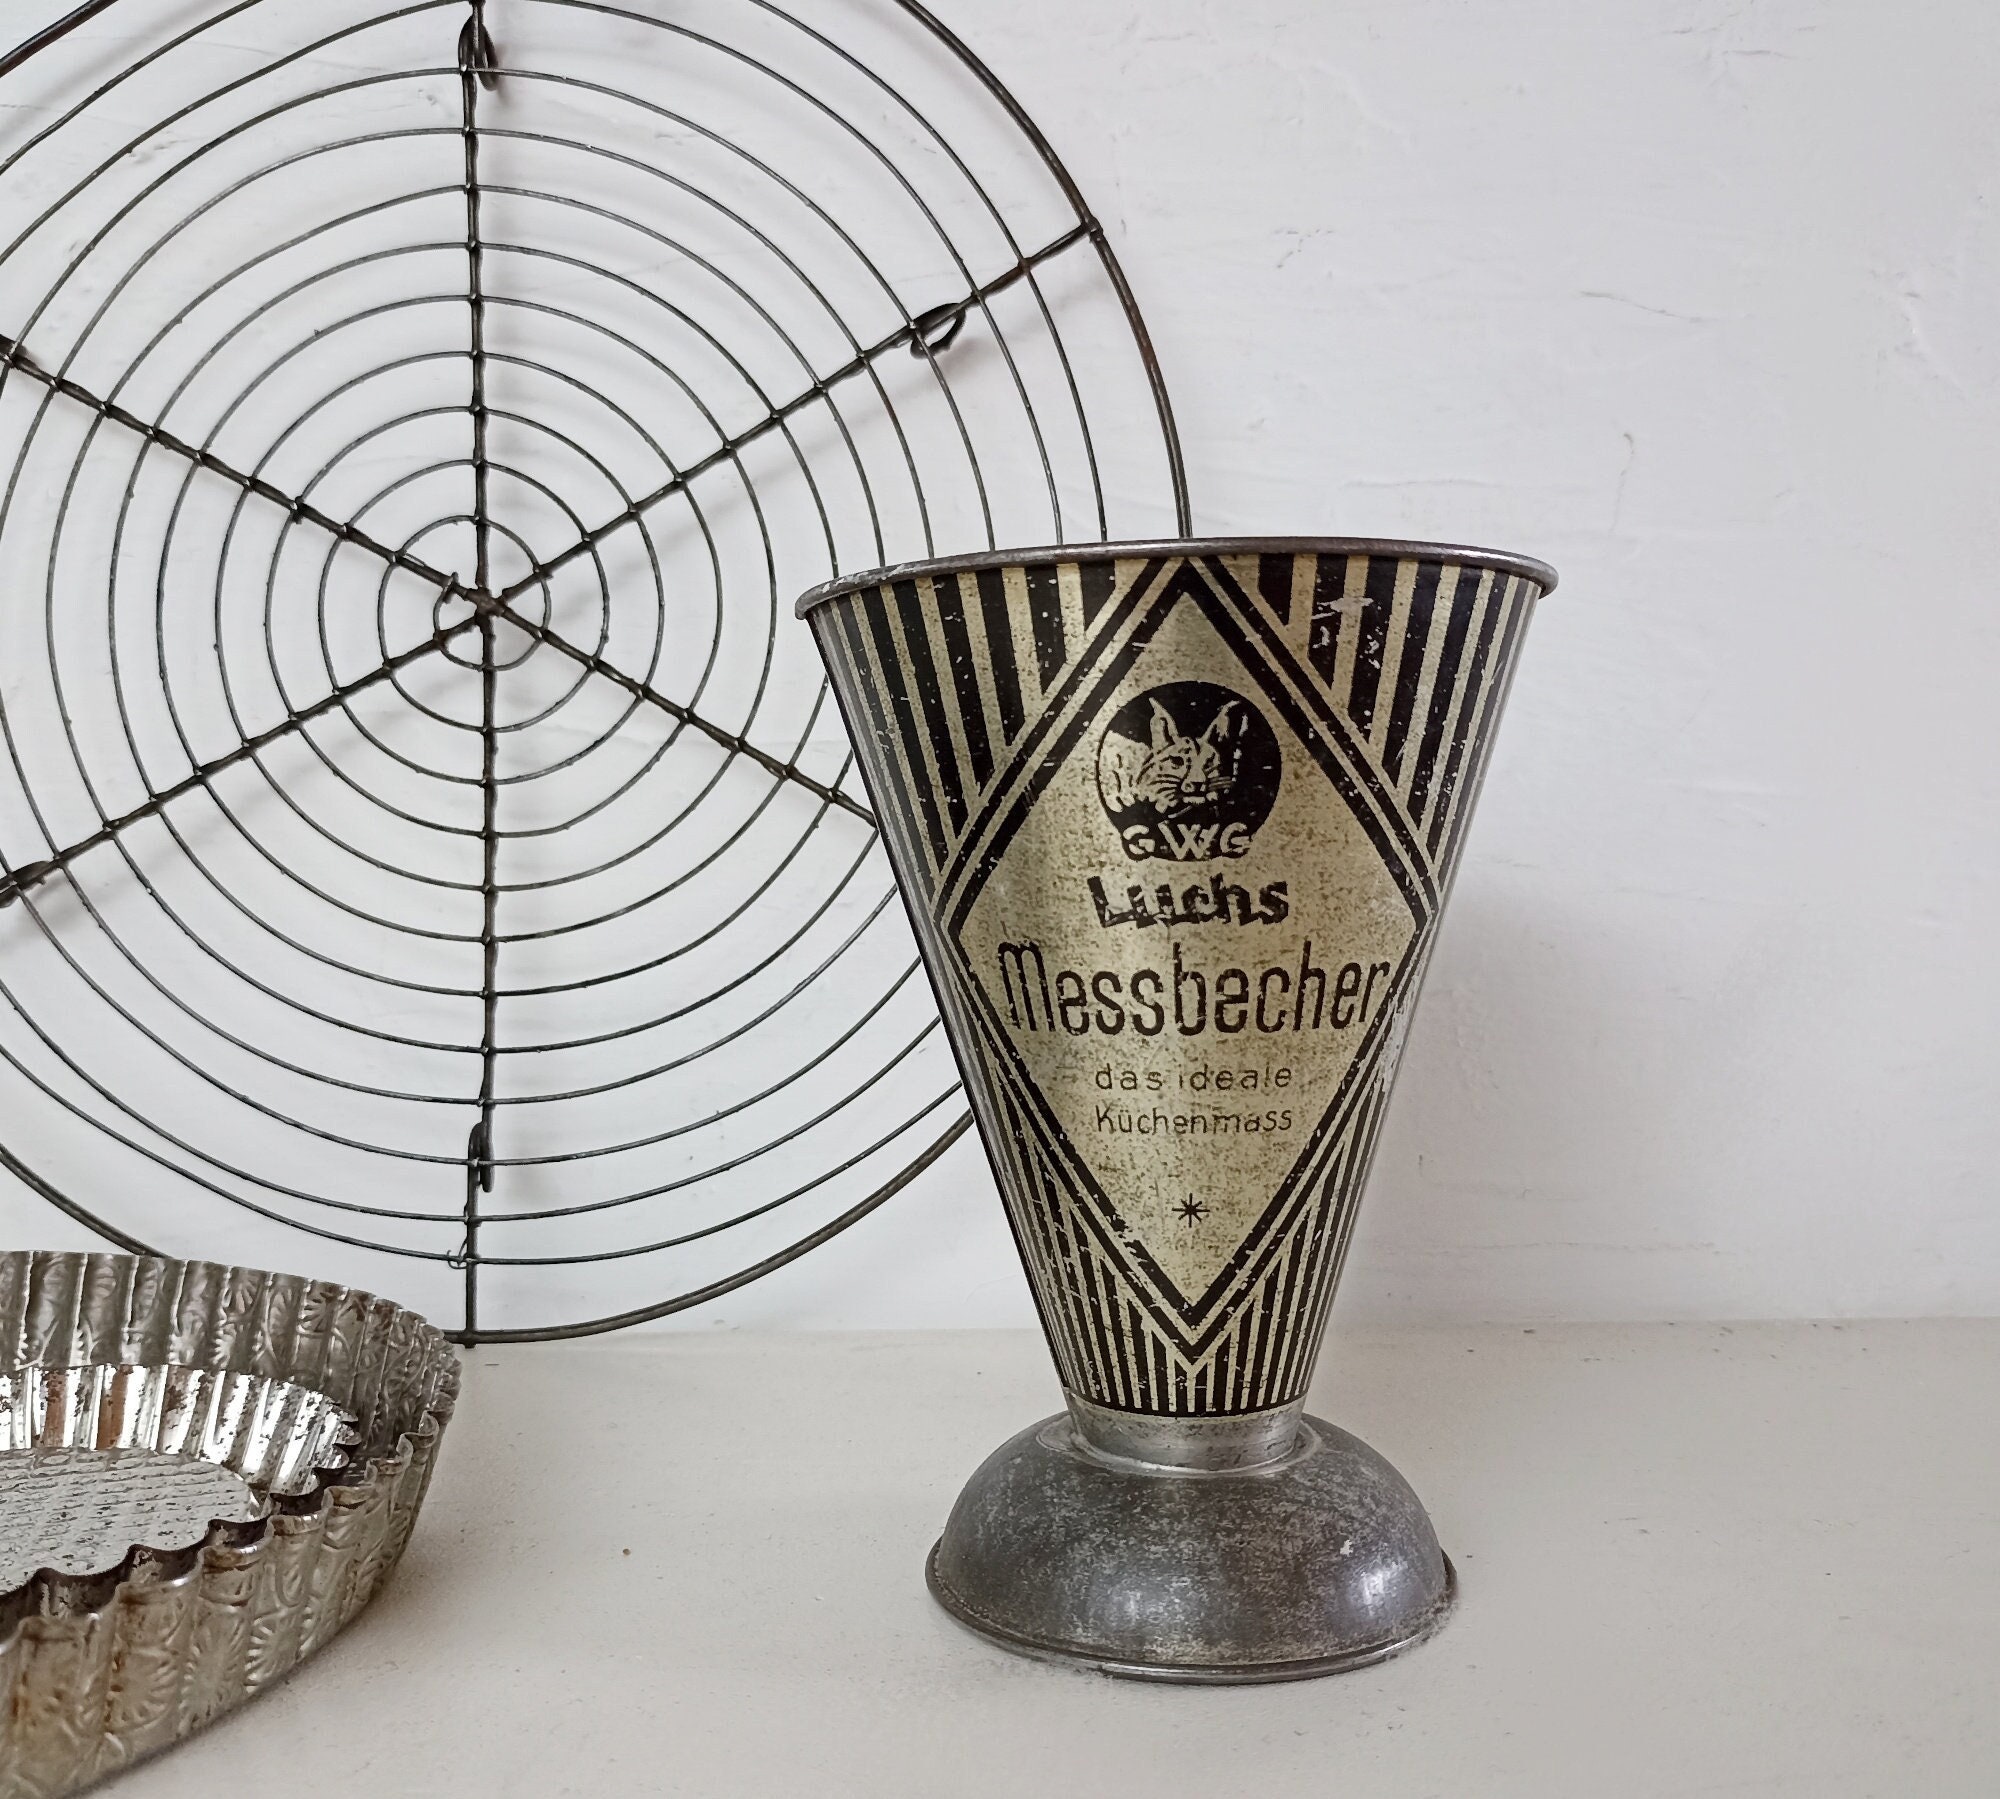 Vintage Messbecher Lynx measuring cup Dr Oetker – Sell My Stuff